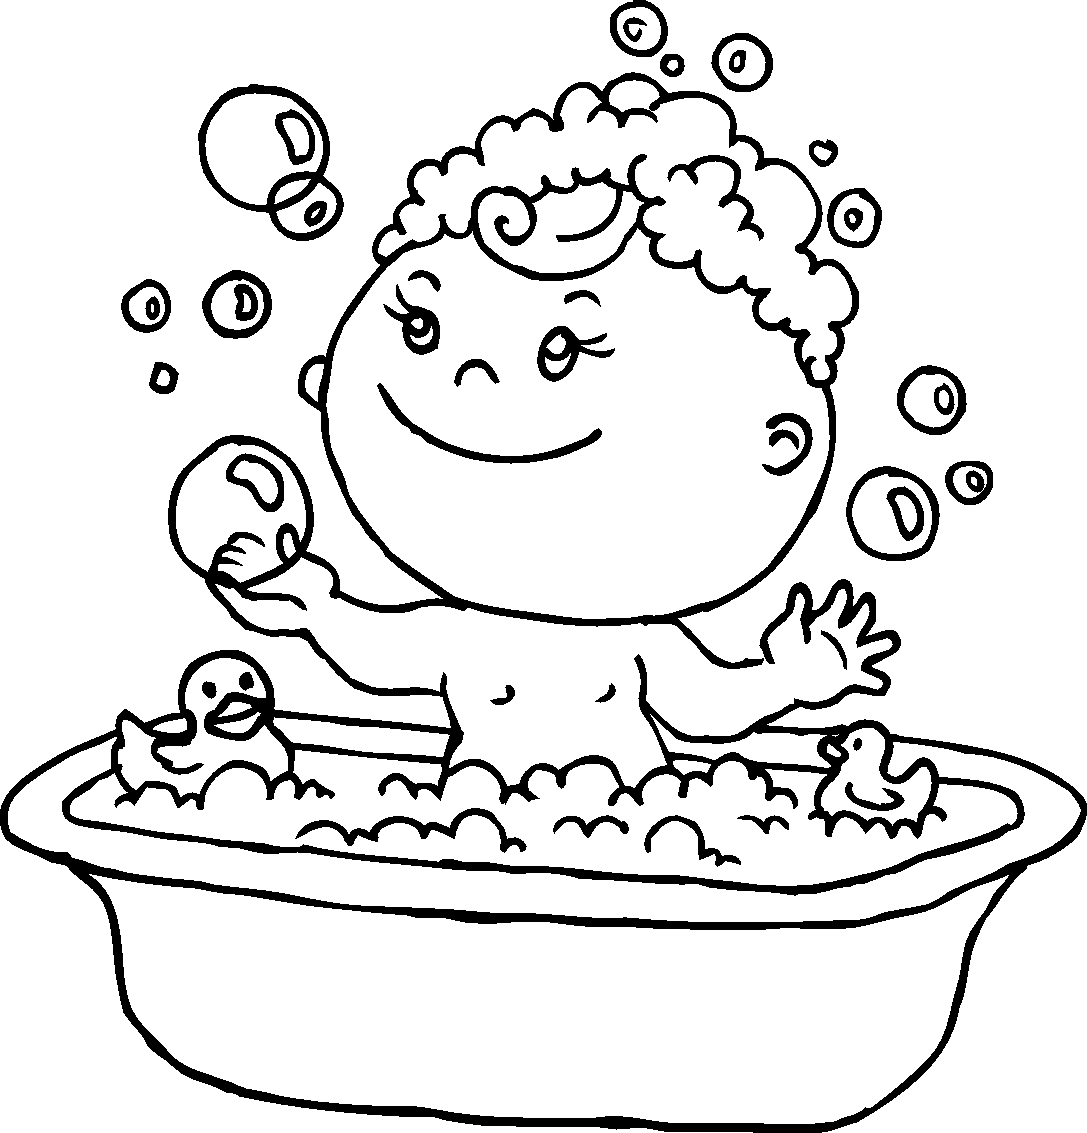 9 Pics of Printable Coloring Pages For Girls 10 And Up - Minion ...